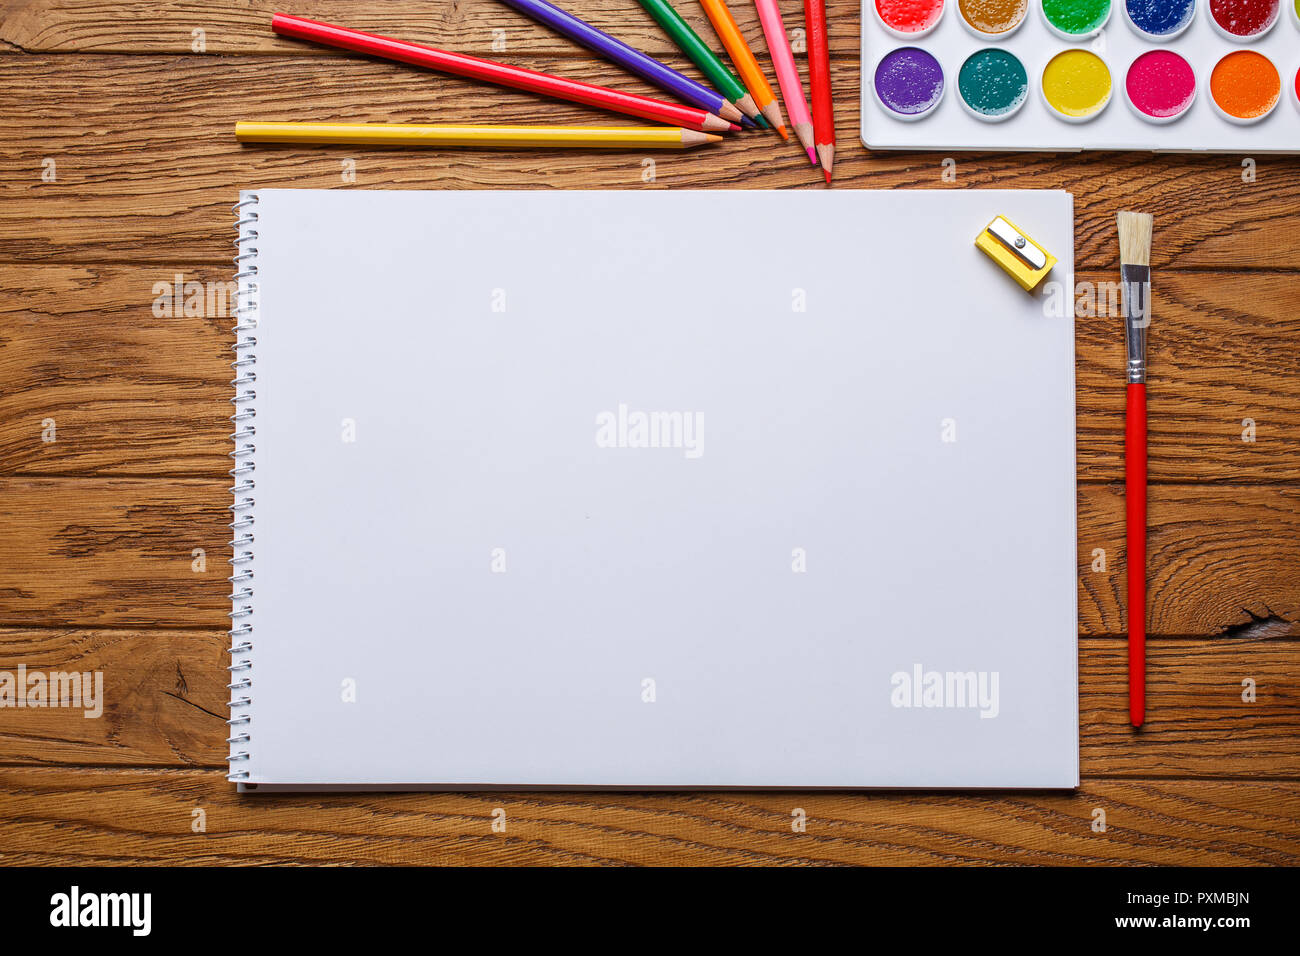 On the wooden table there is an album for painting, paint, pencils and brushe. On a wooden background. Top view, flat lay. copyspace Stock Photo